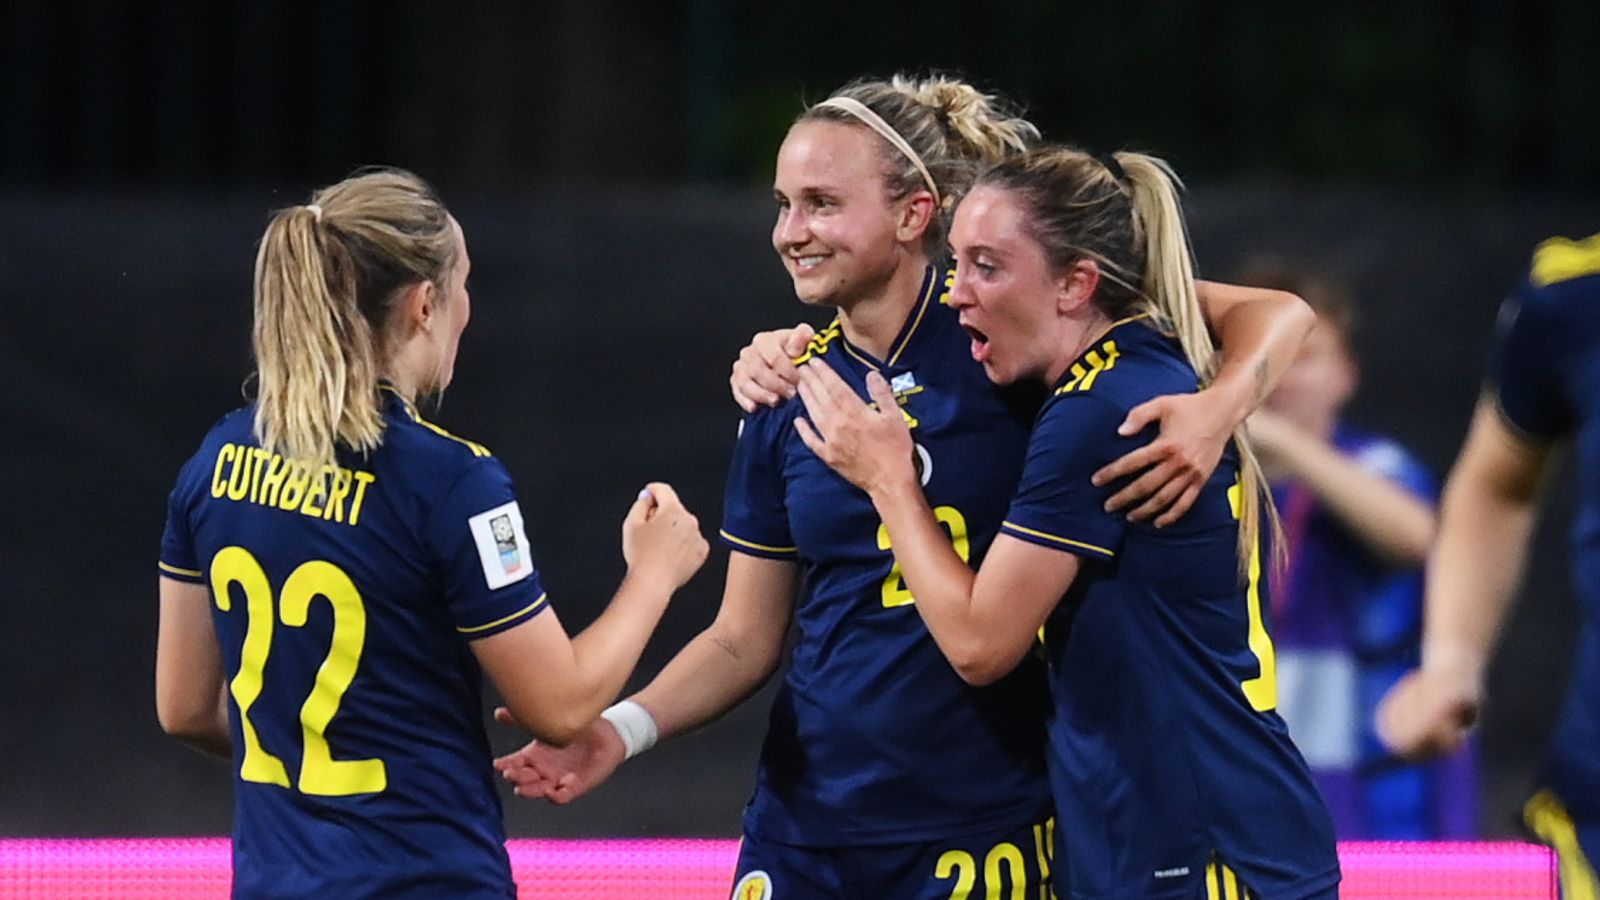 Scotland Women 2-1 Venezuela Women: Pedro Martinez Losa’s side earn victory with goals from Kelly Clark and Claire Emslie | Football News